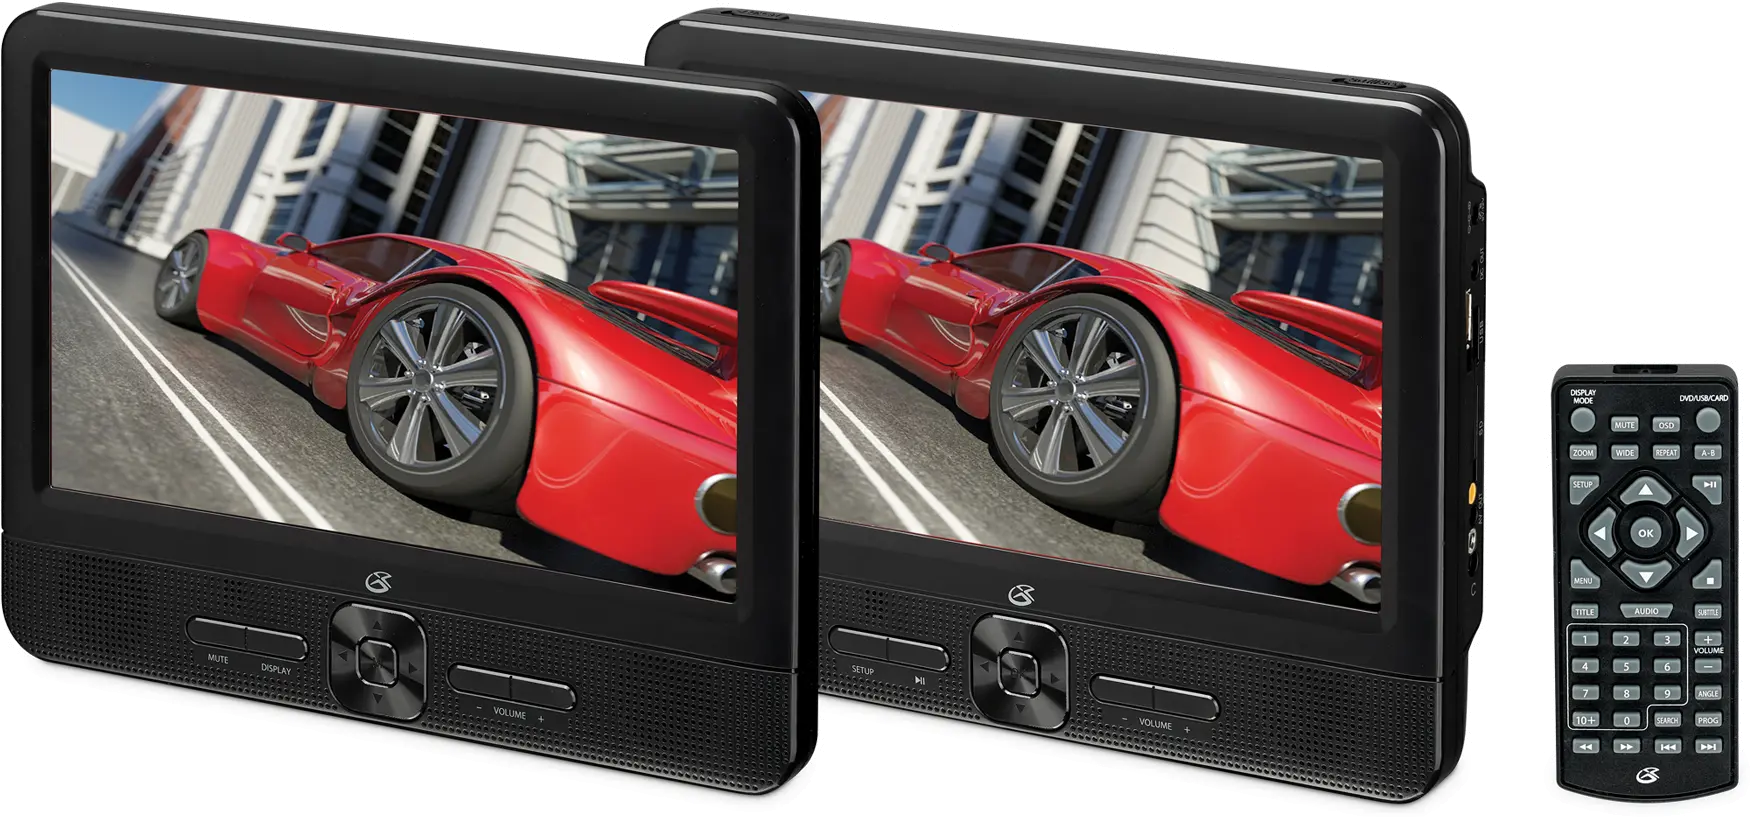 Portable DVD Player with 2 Displays